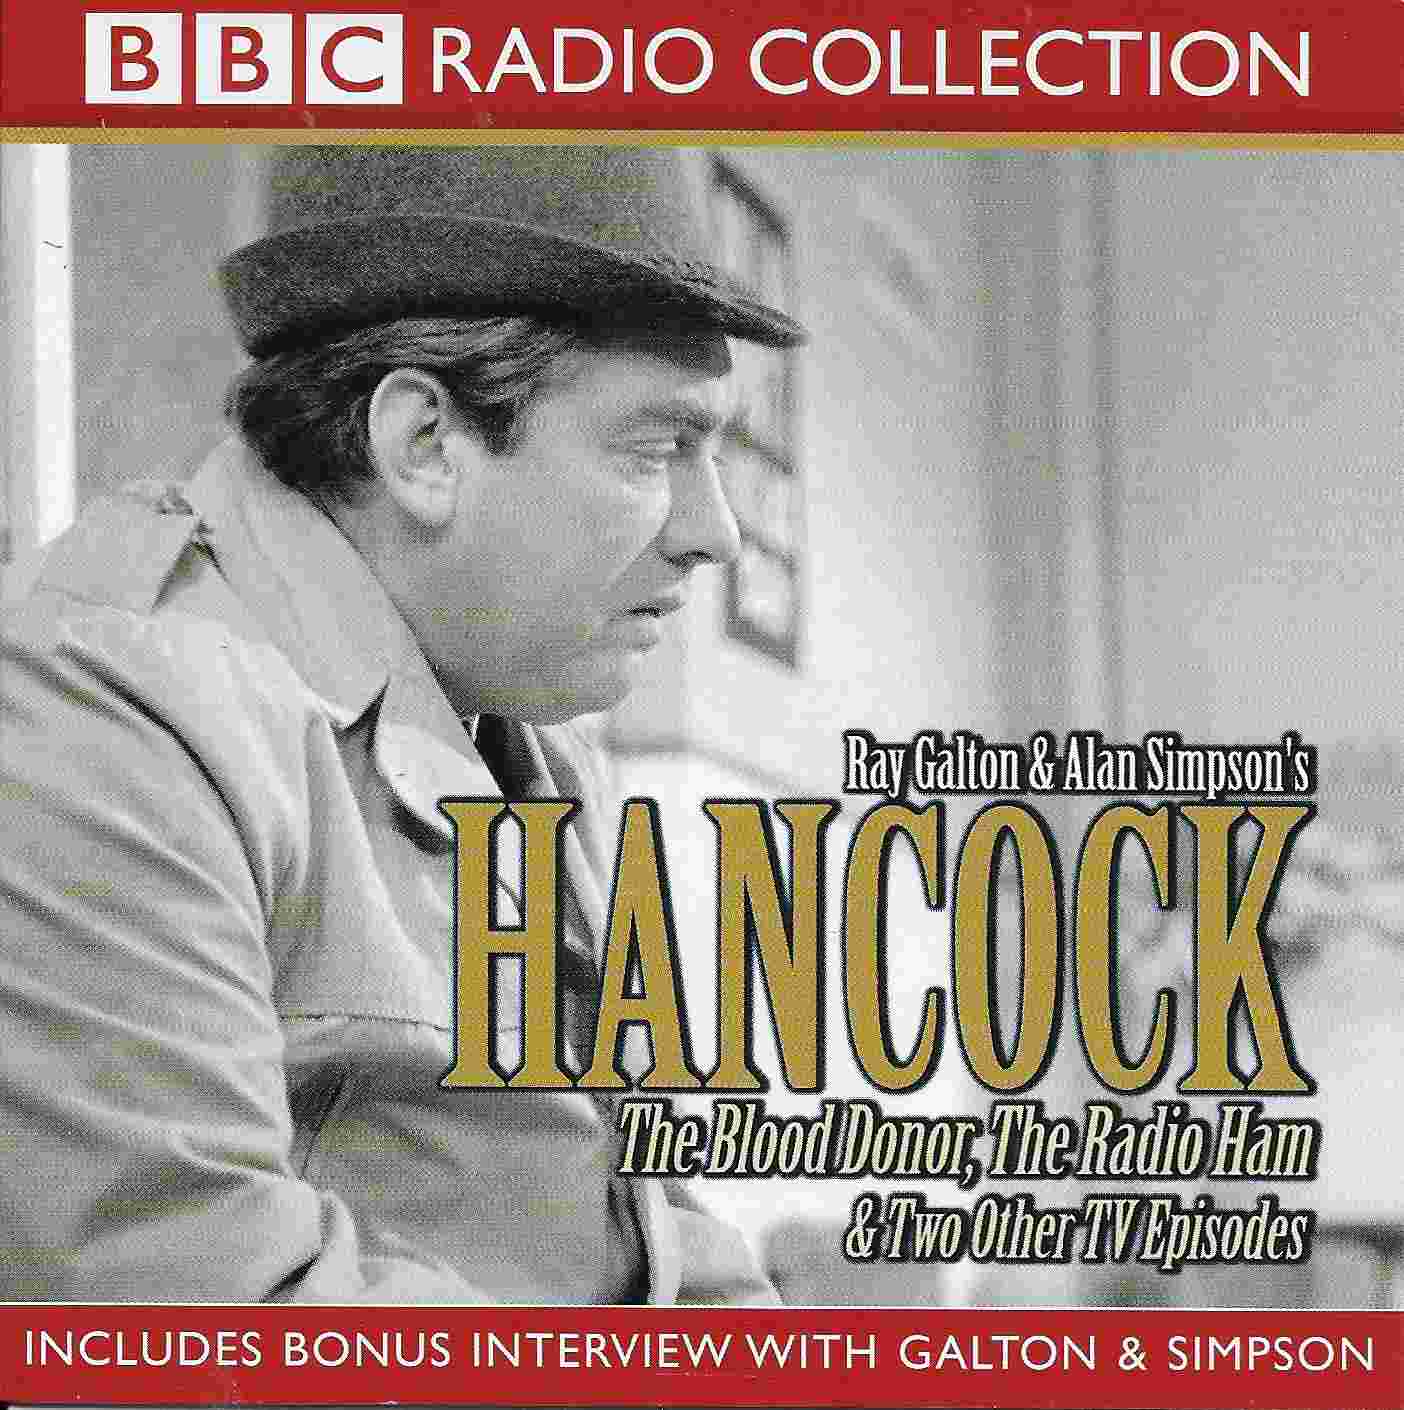 Picture of ISBN 0-563-49520-0 Hancock by artist Ray Galton / Alan Simpson from the BBC cds - Records and Tapes library